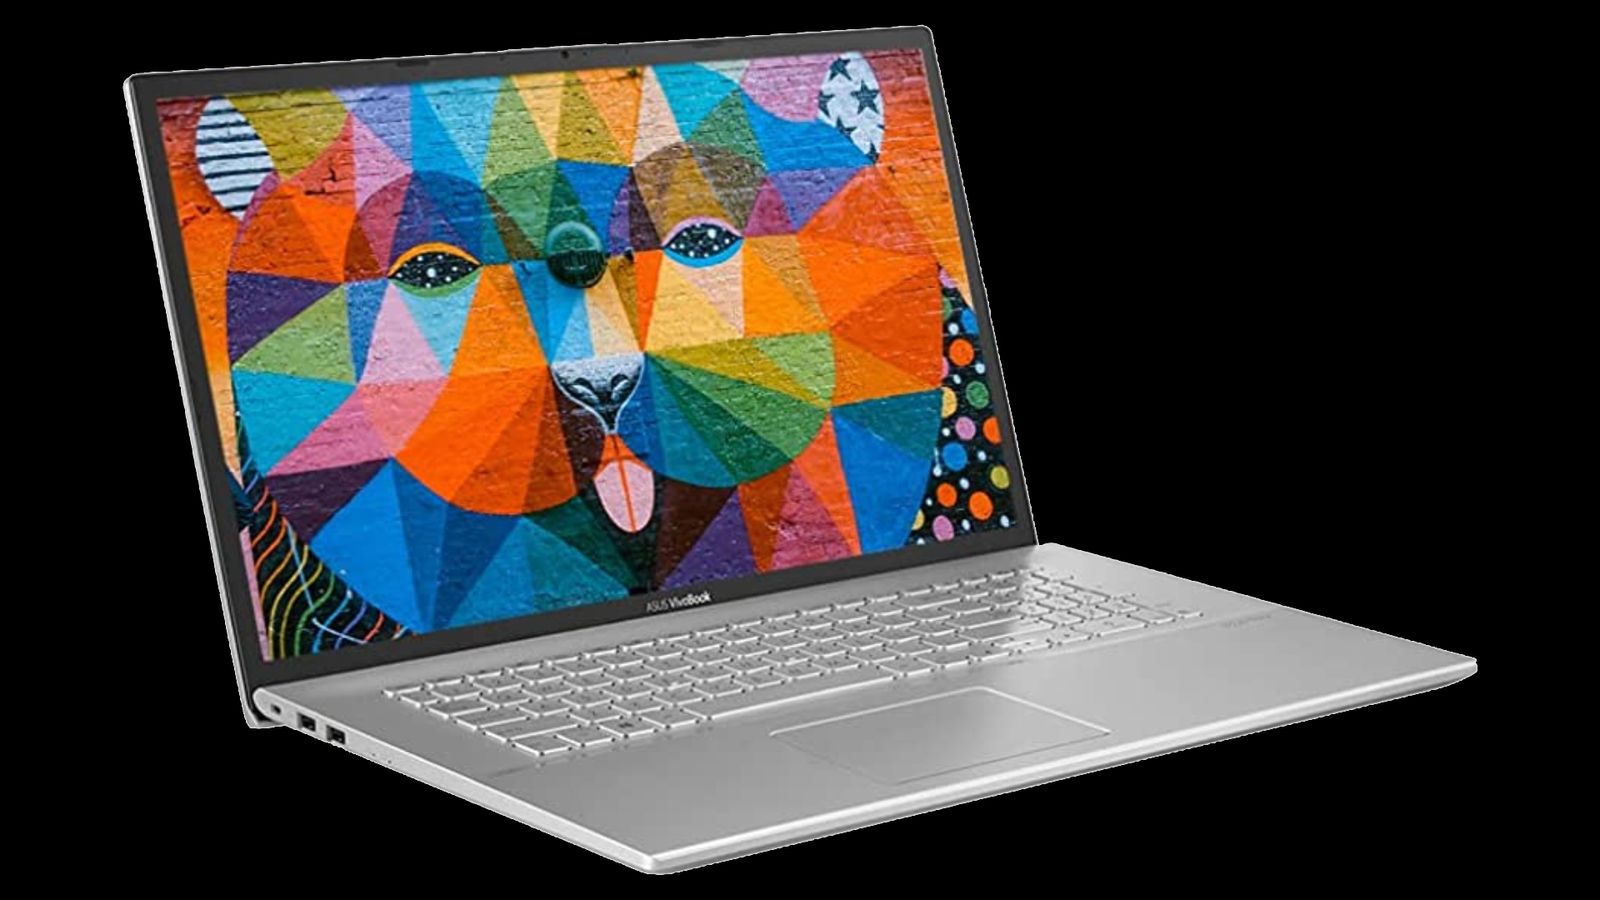 ASUS VivoBook X712EA product image of a silver laptop with a mural of a multicoloured lion on its display.